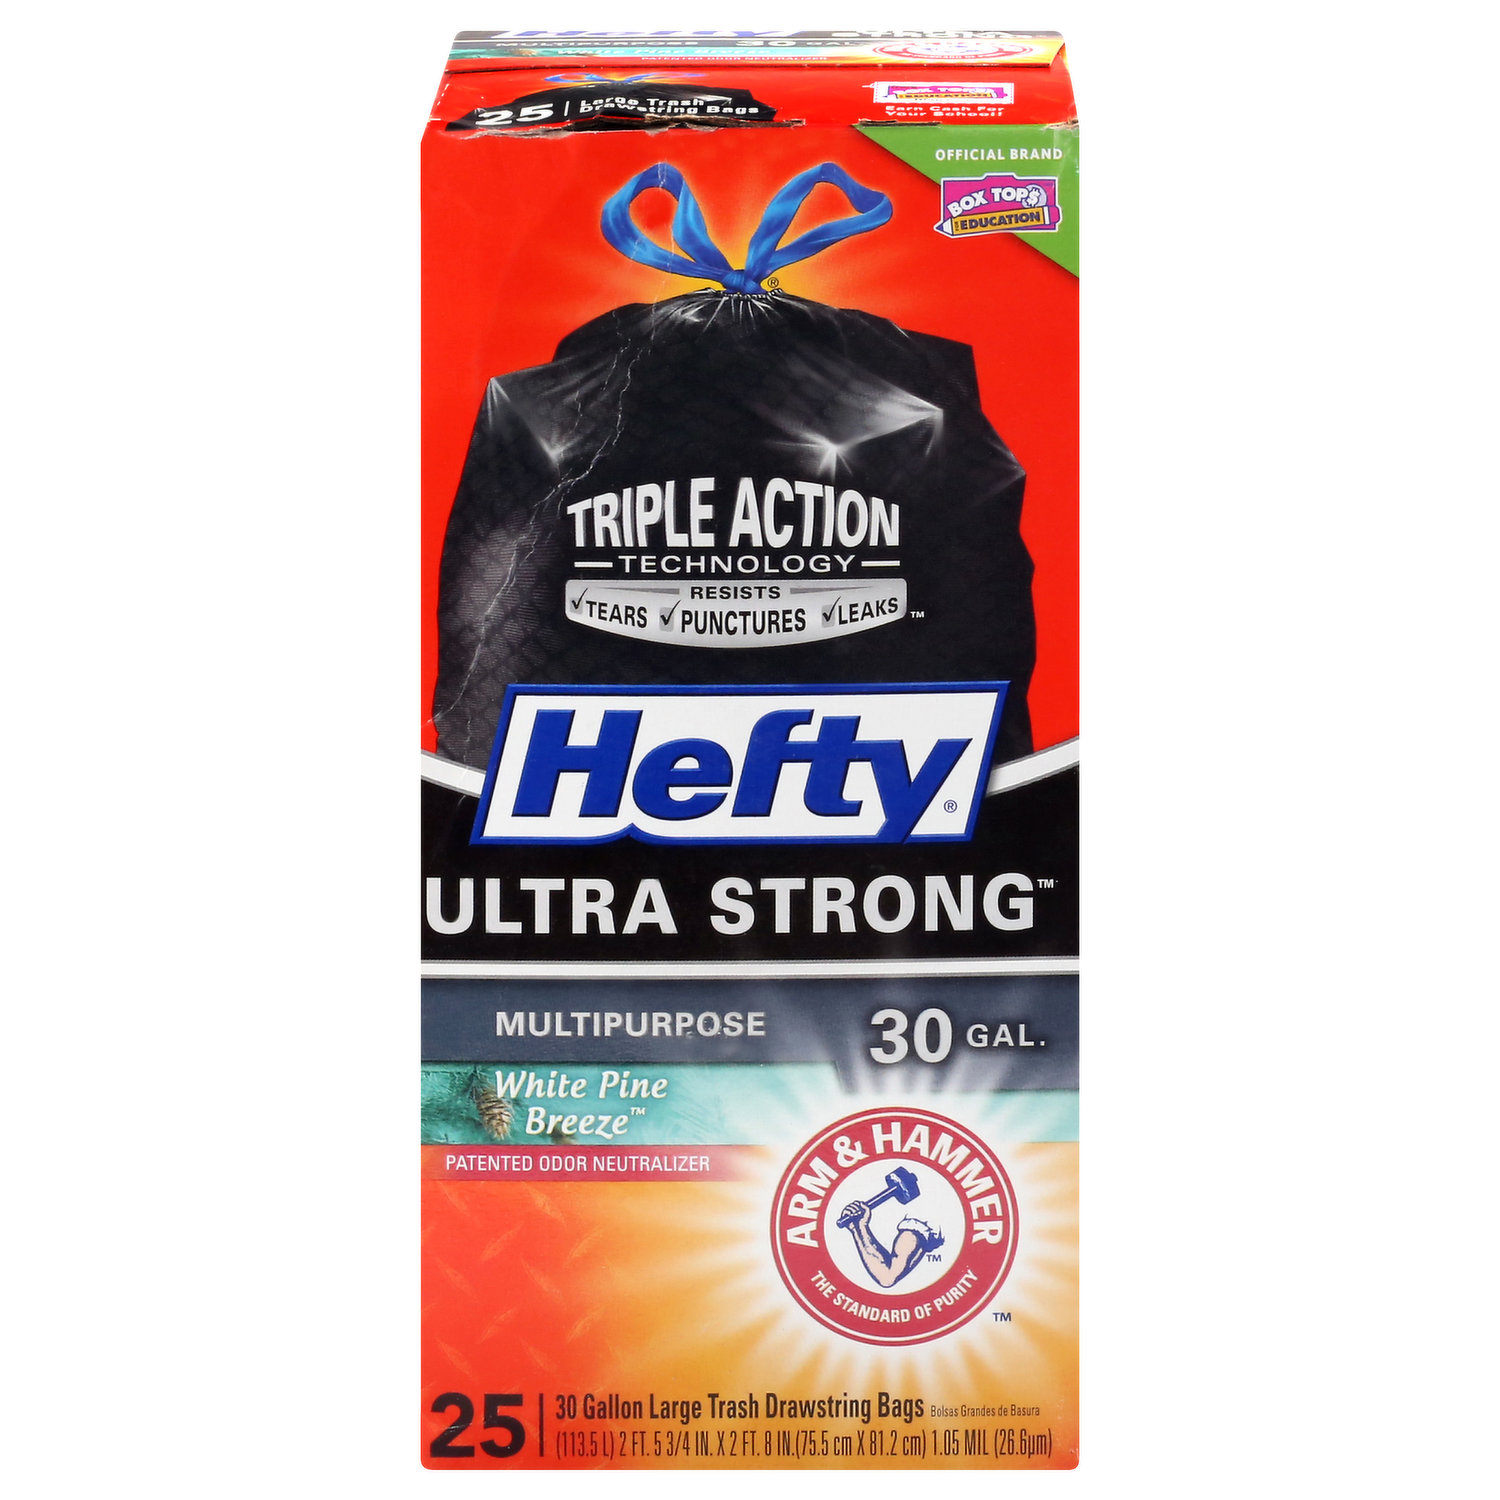 Hefty Ultra Strong Recovered Materials Trash Bags